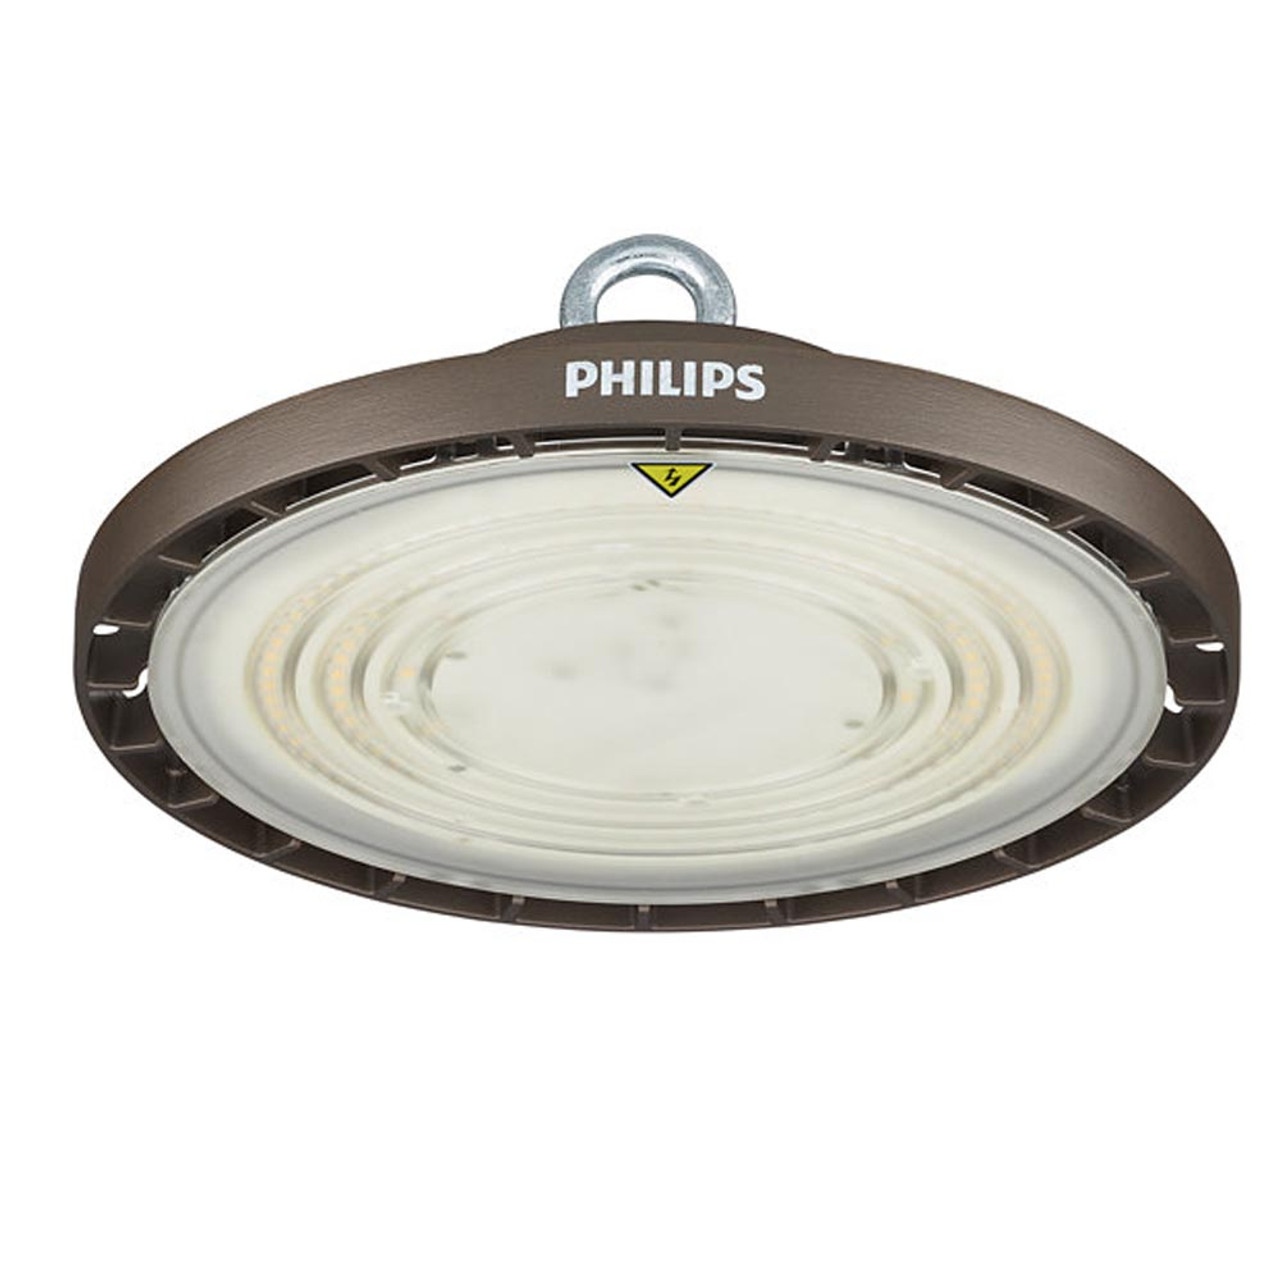 Philips LED HighBay 94W 10500lm Cool White 840 90 Degrees IP65